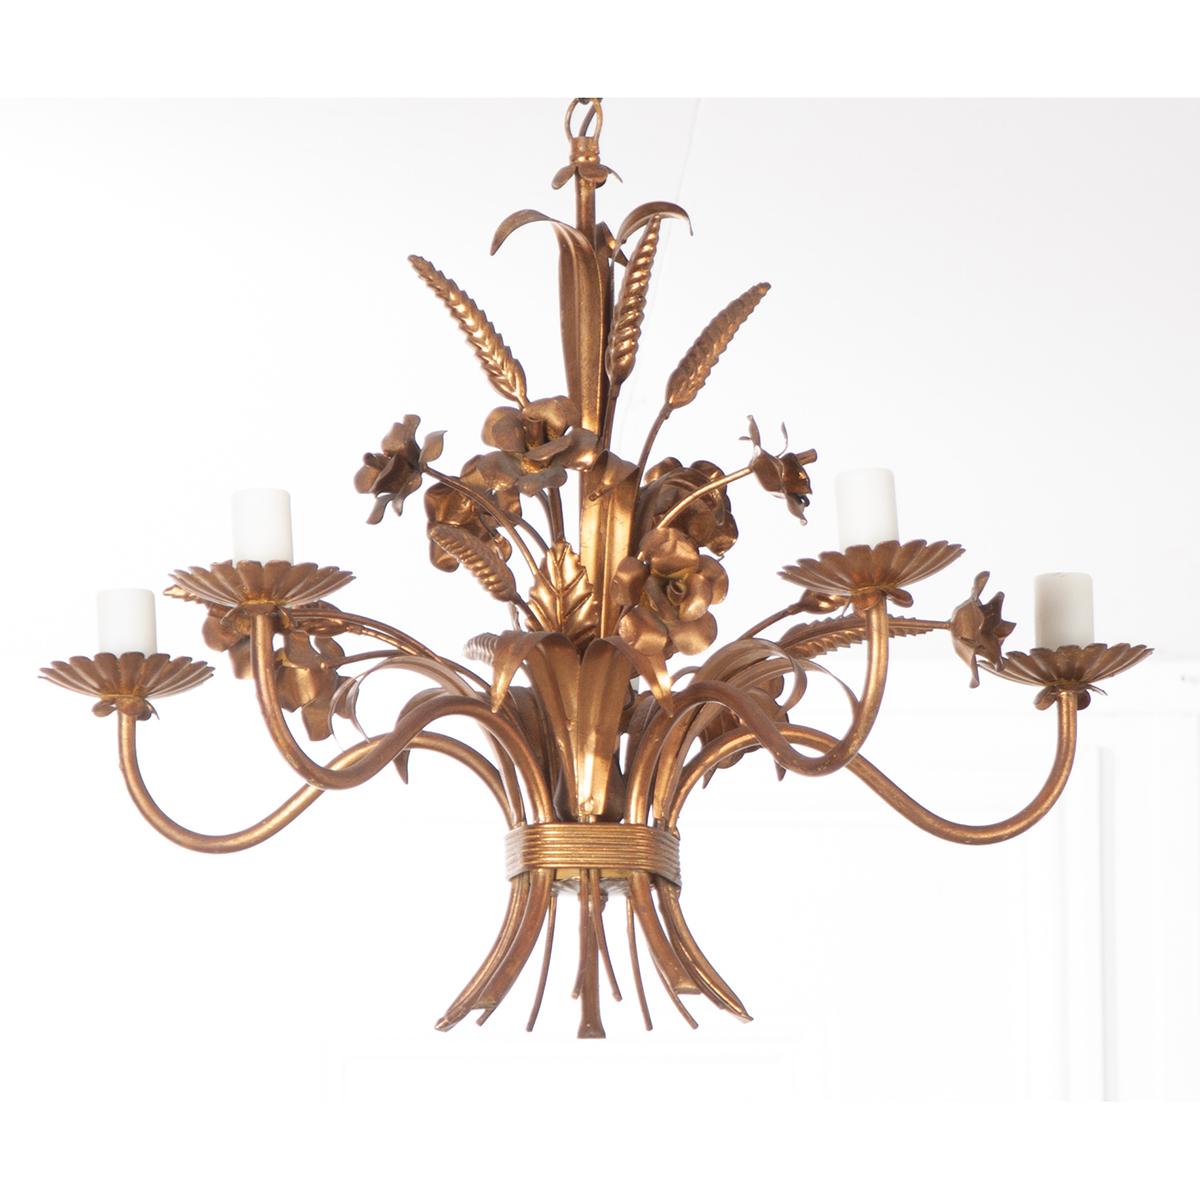 A wonderful little five light vintage chandelier from early 20th century France. The fixture is designed with sweet floral imagery and other foliate details that form a bouquet like none other. The petite fixture is made of wonderfully painted metal